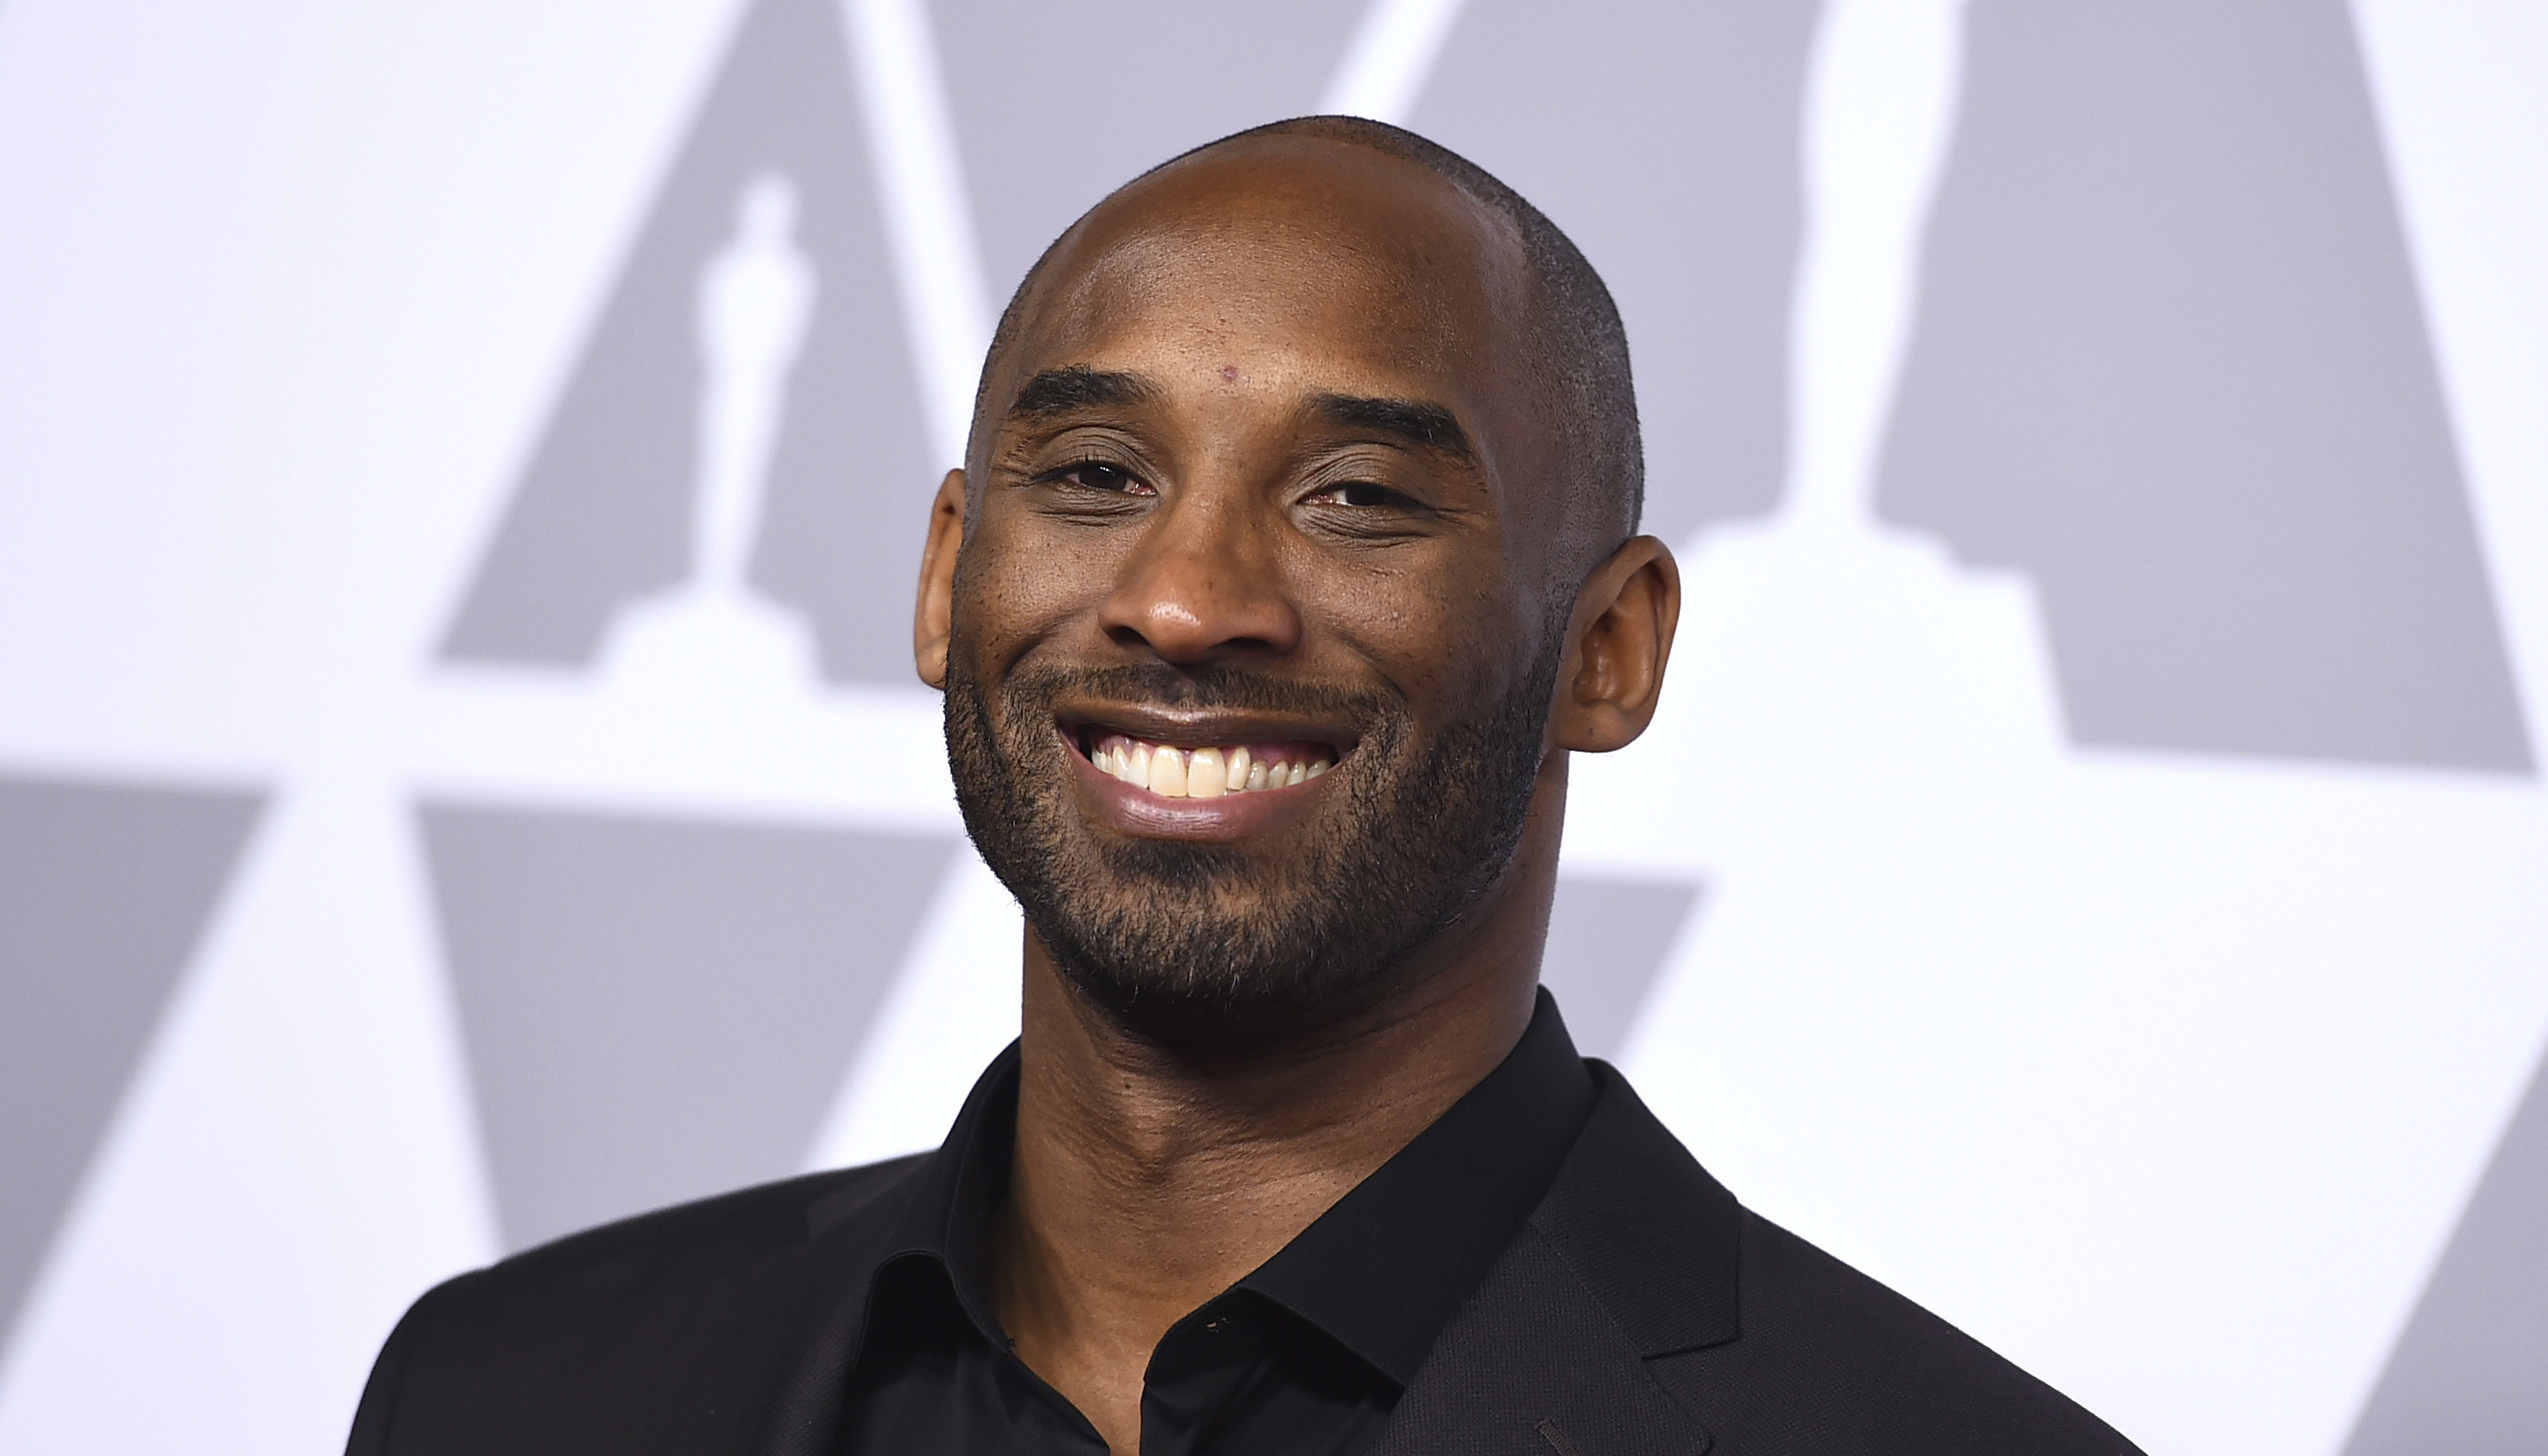 Petition to change NBA logo to feature late Kobe Bryant gets